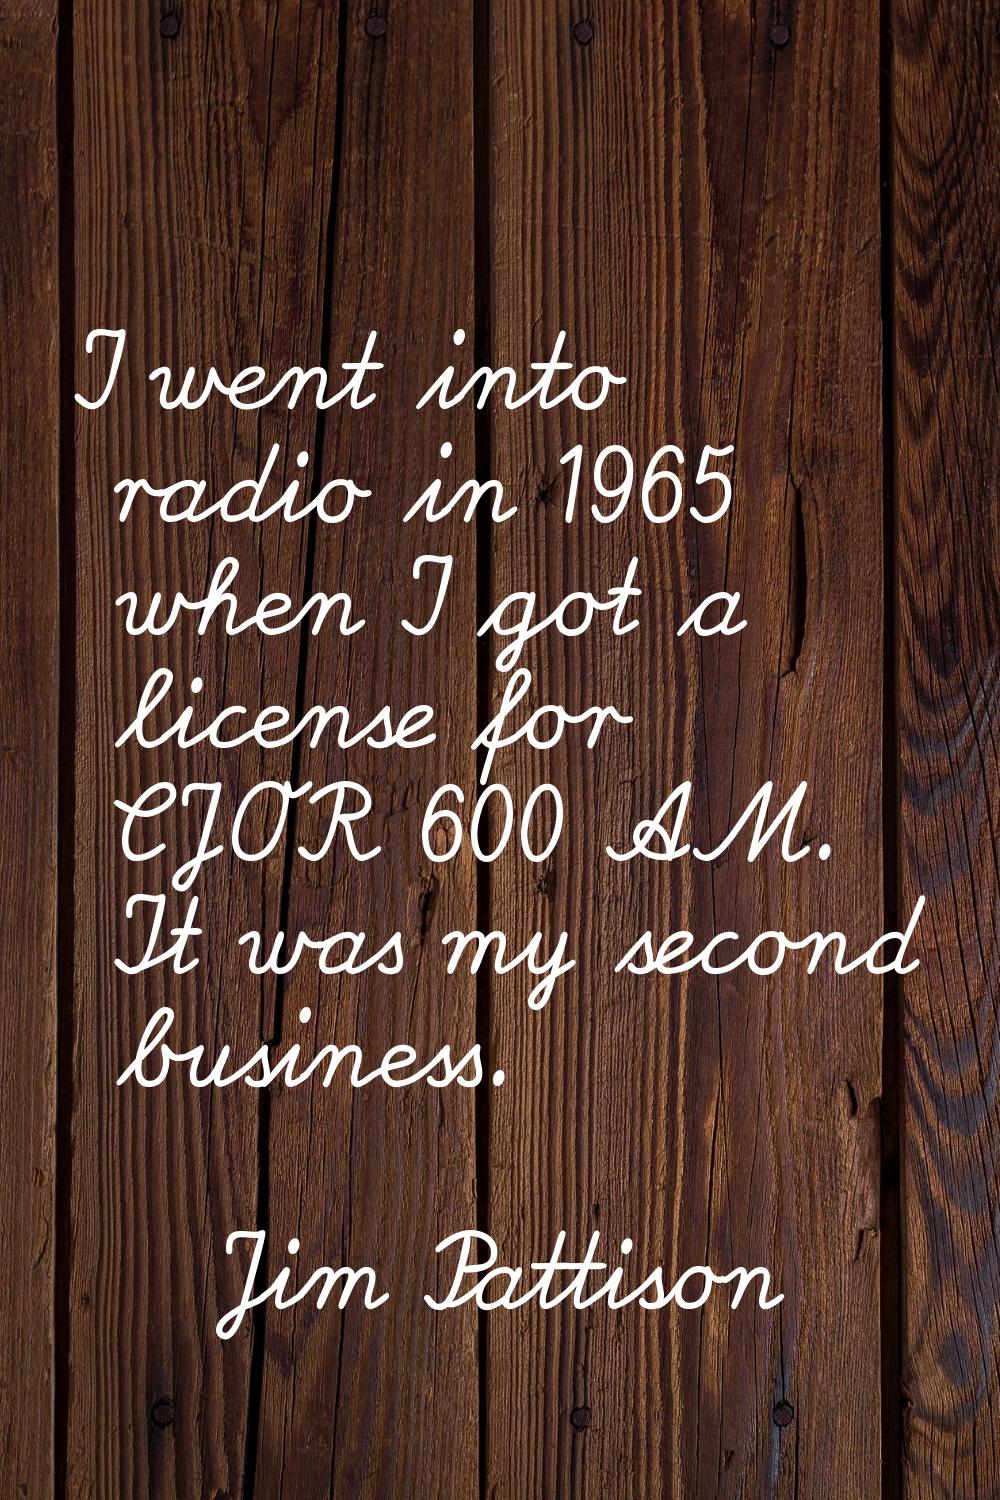 I went into radio in 1965 when I got a license for CJOR 600 AM. It was my second business.